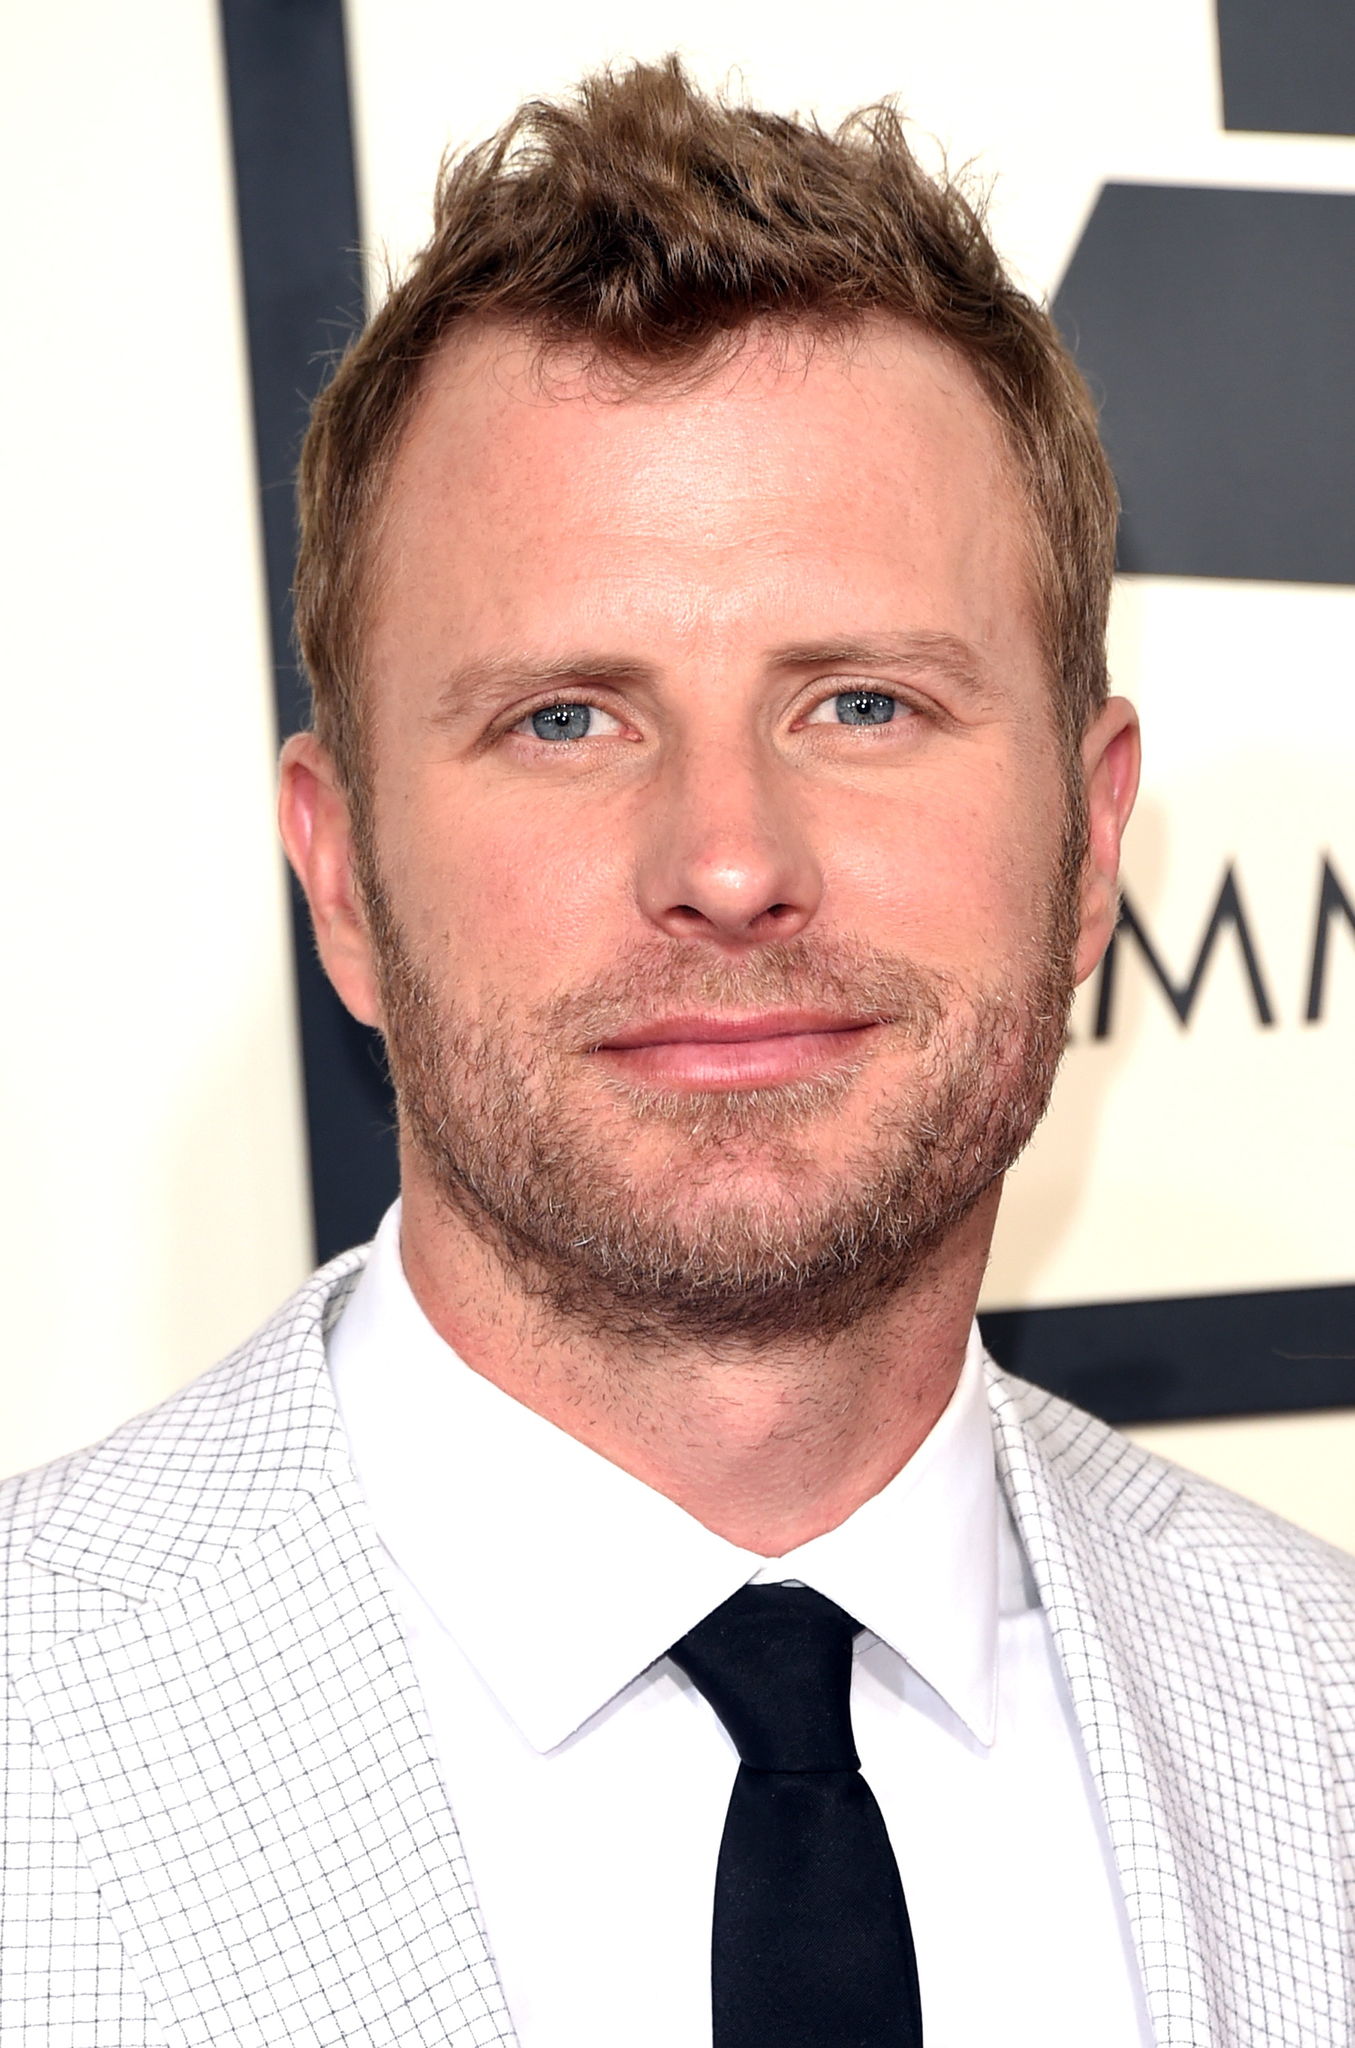 Dierks Bentley in The 57th Annual Grammy Awards (2015)